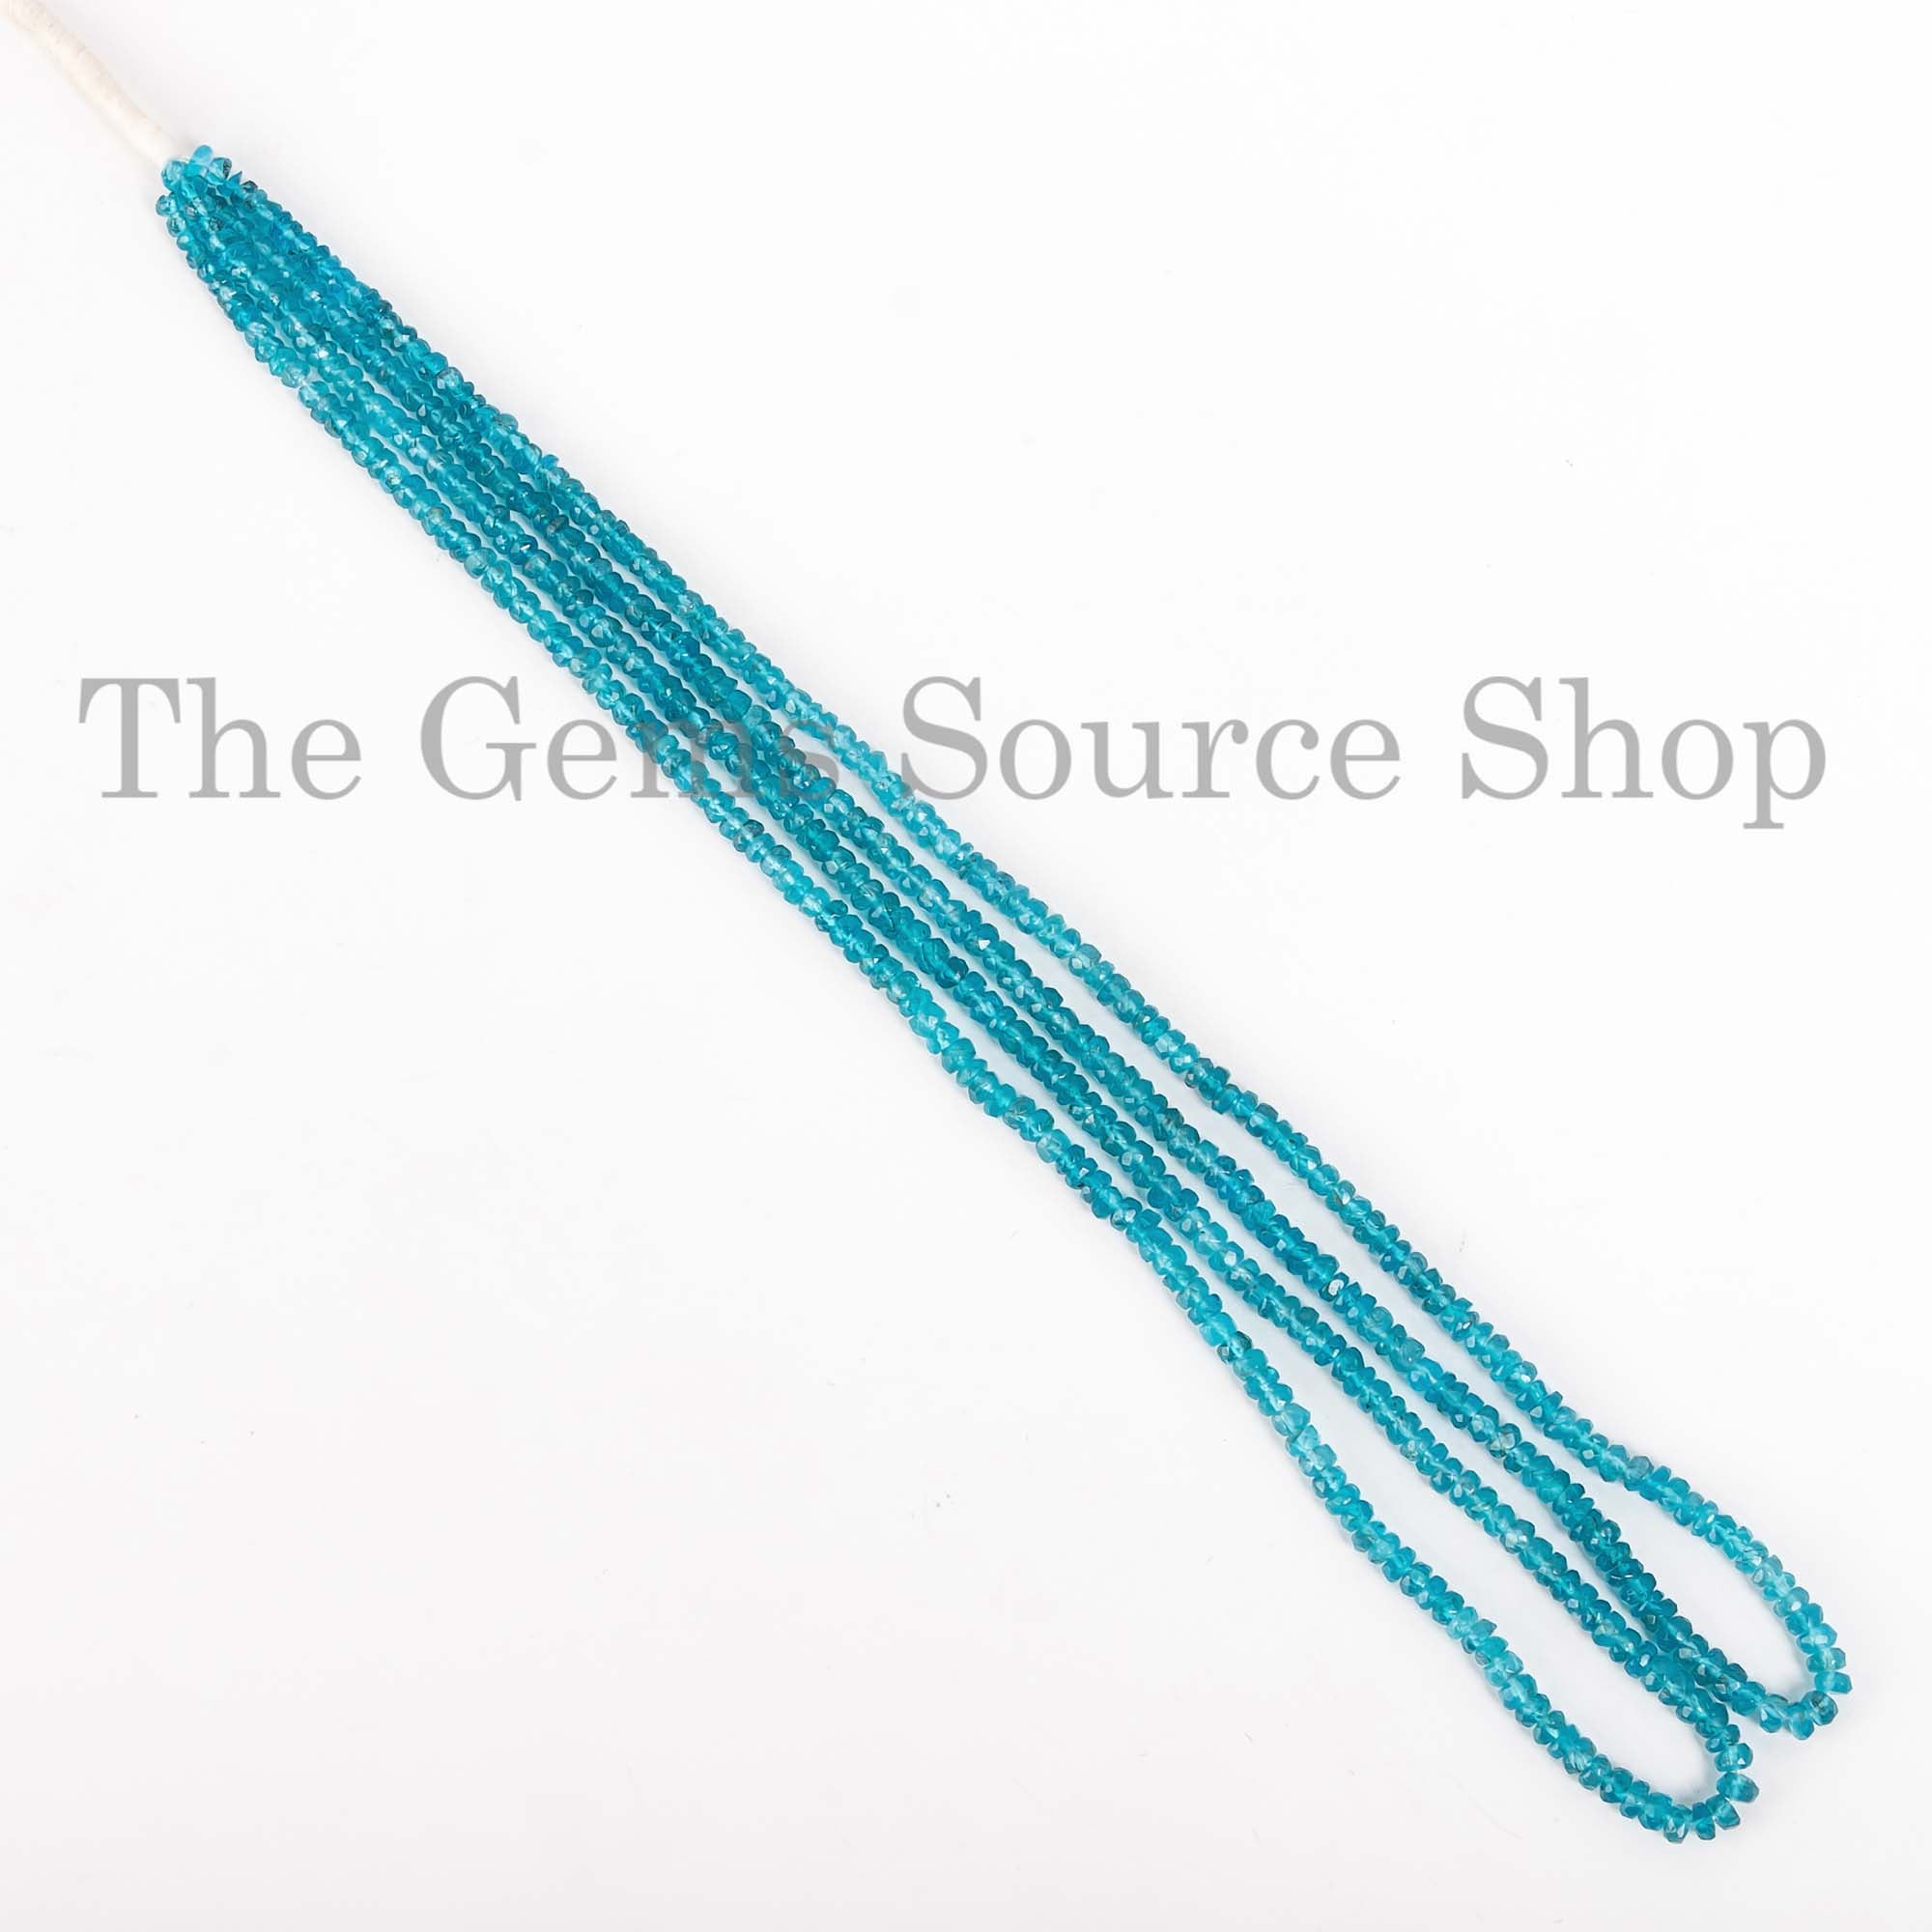 Neon Apatite Beads, Apatite Faceted Beads, Apatite Rondelle Shape Beads, Apatite Gemstone Beads